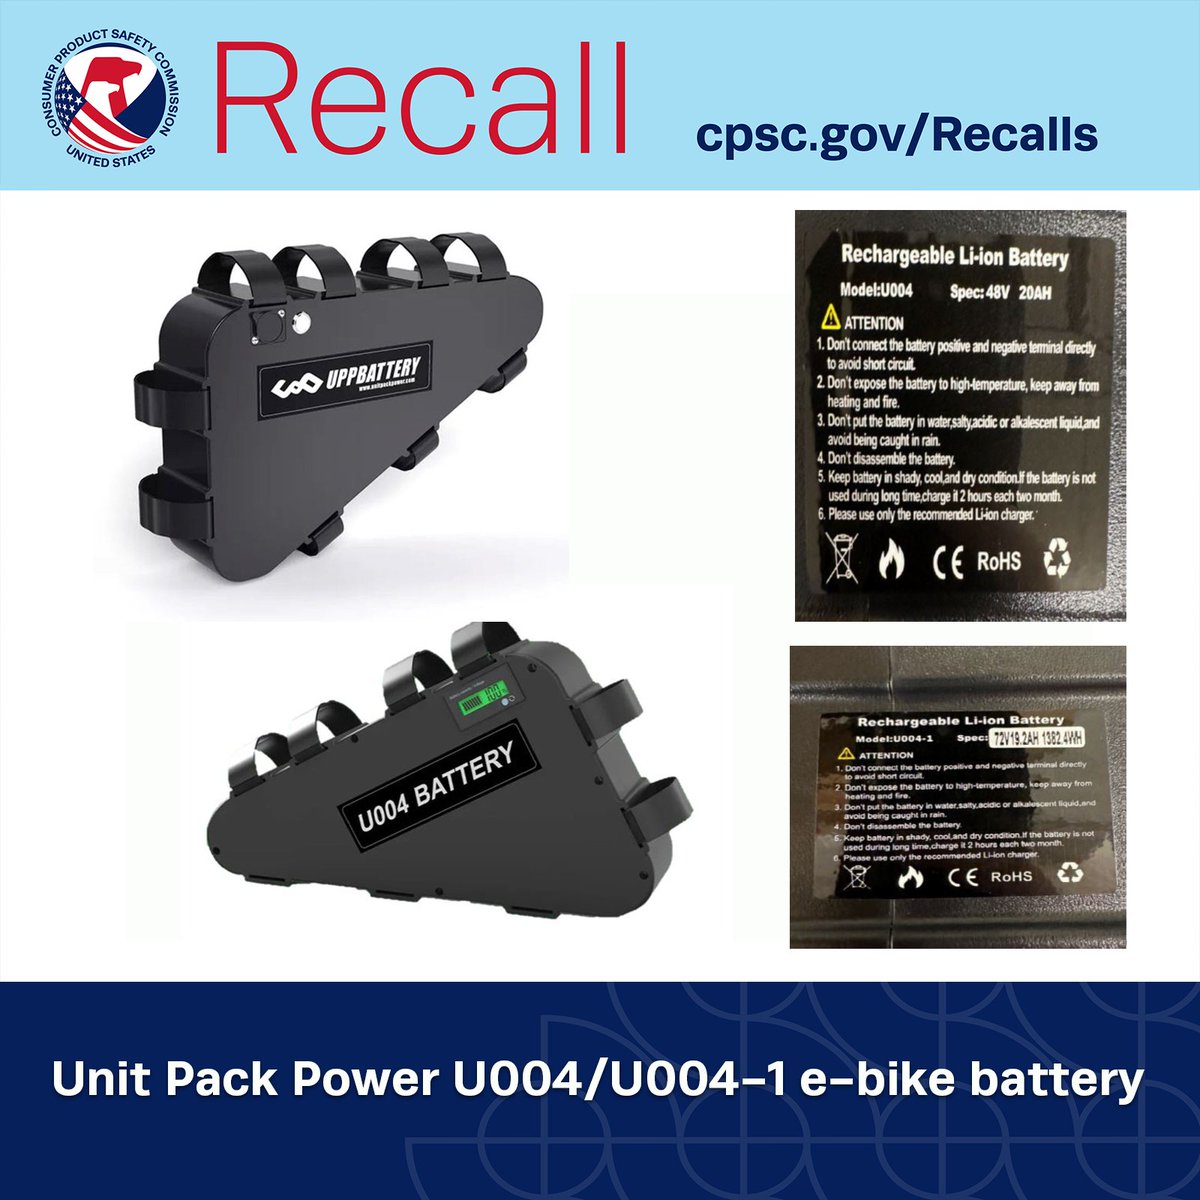 #WARNING: @USCPSC warns consumers to stop using Unit Pack Power (UPP) e-bike batteries due to fire and burn hazards; Risk of serious injury and death. cpsc.gov/Newsroom/News-…